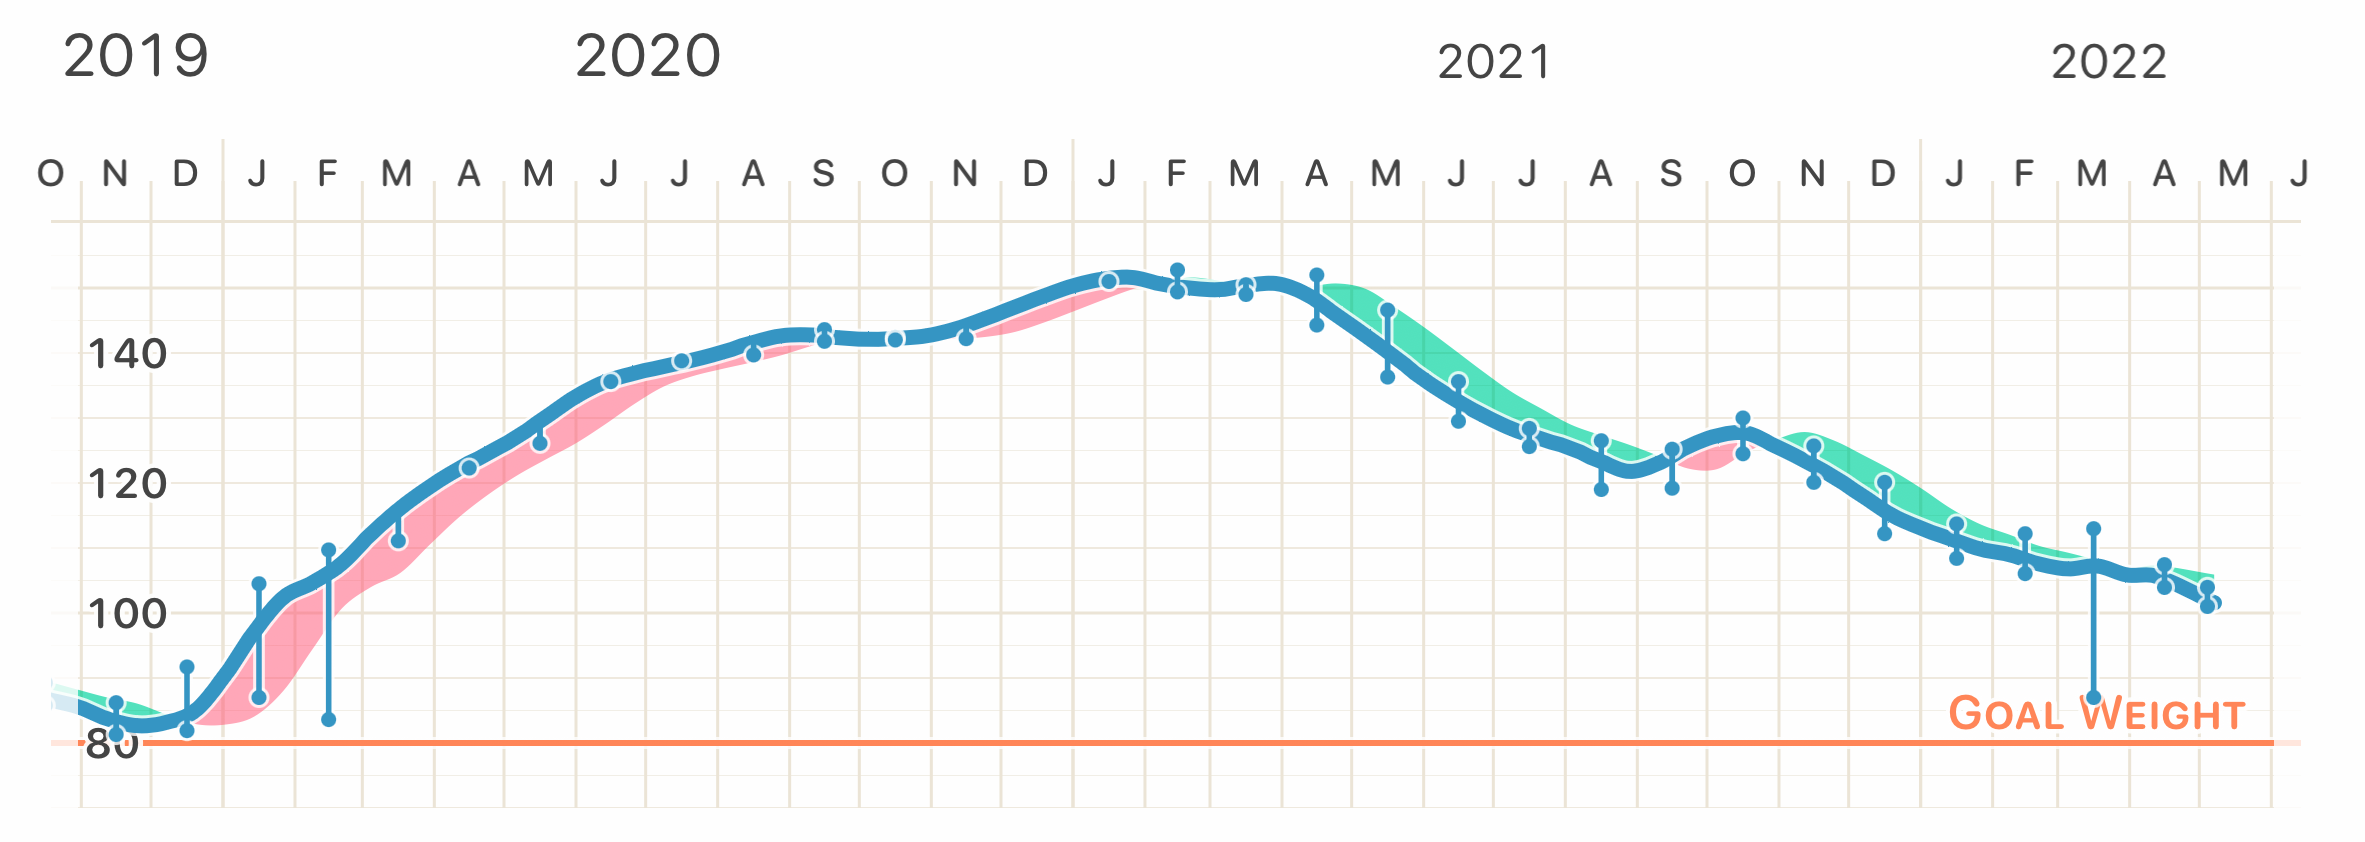 Personal weight chart between 2019 and 2022.